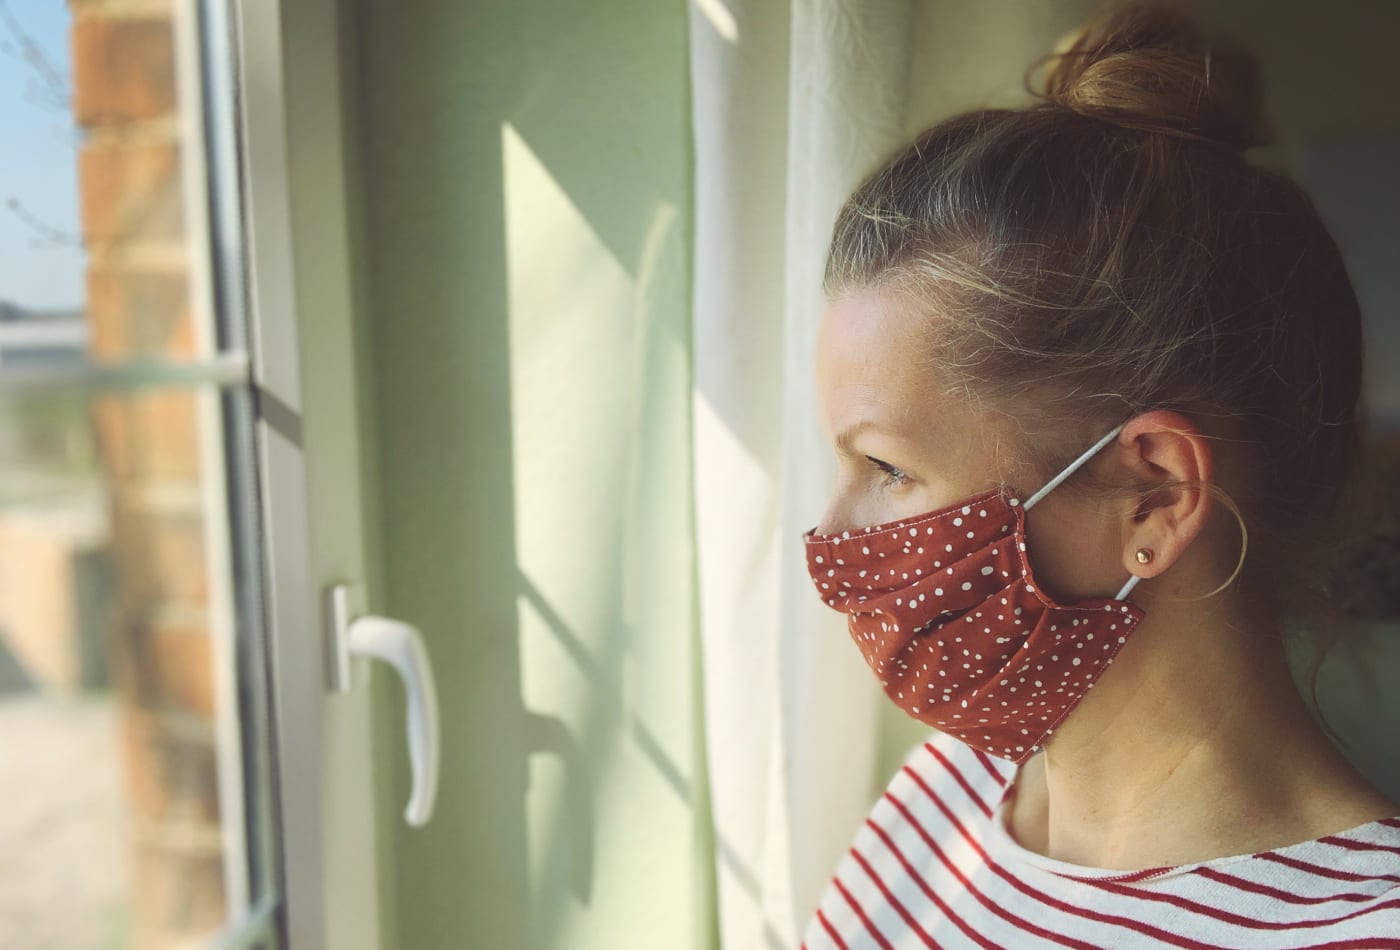 How to use and clean homemade face mask to prevent COVID19